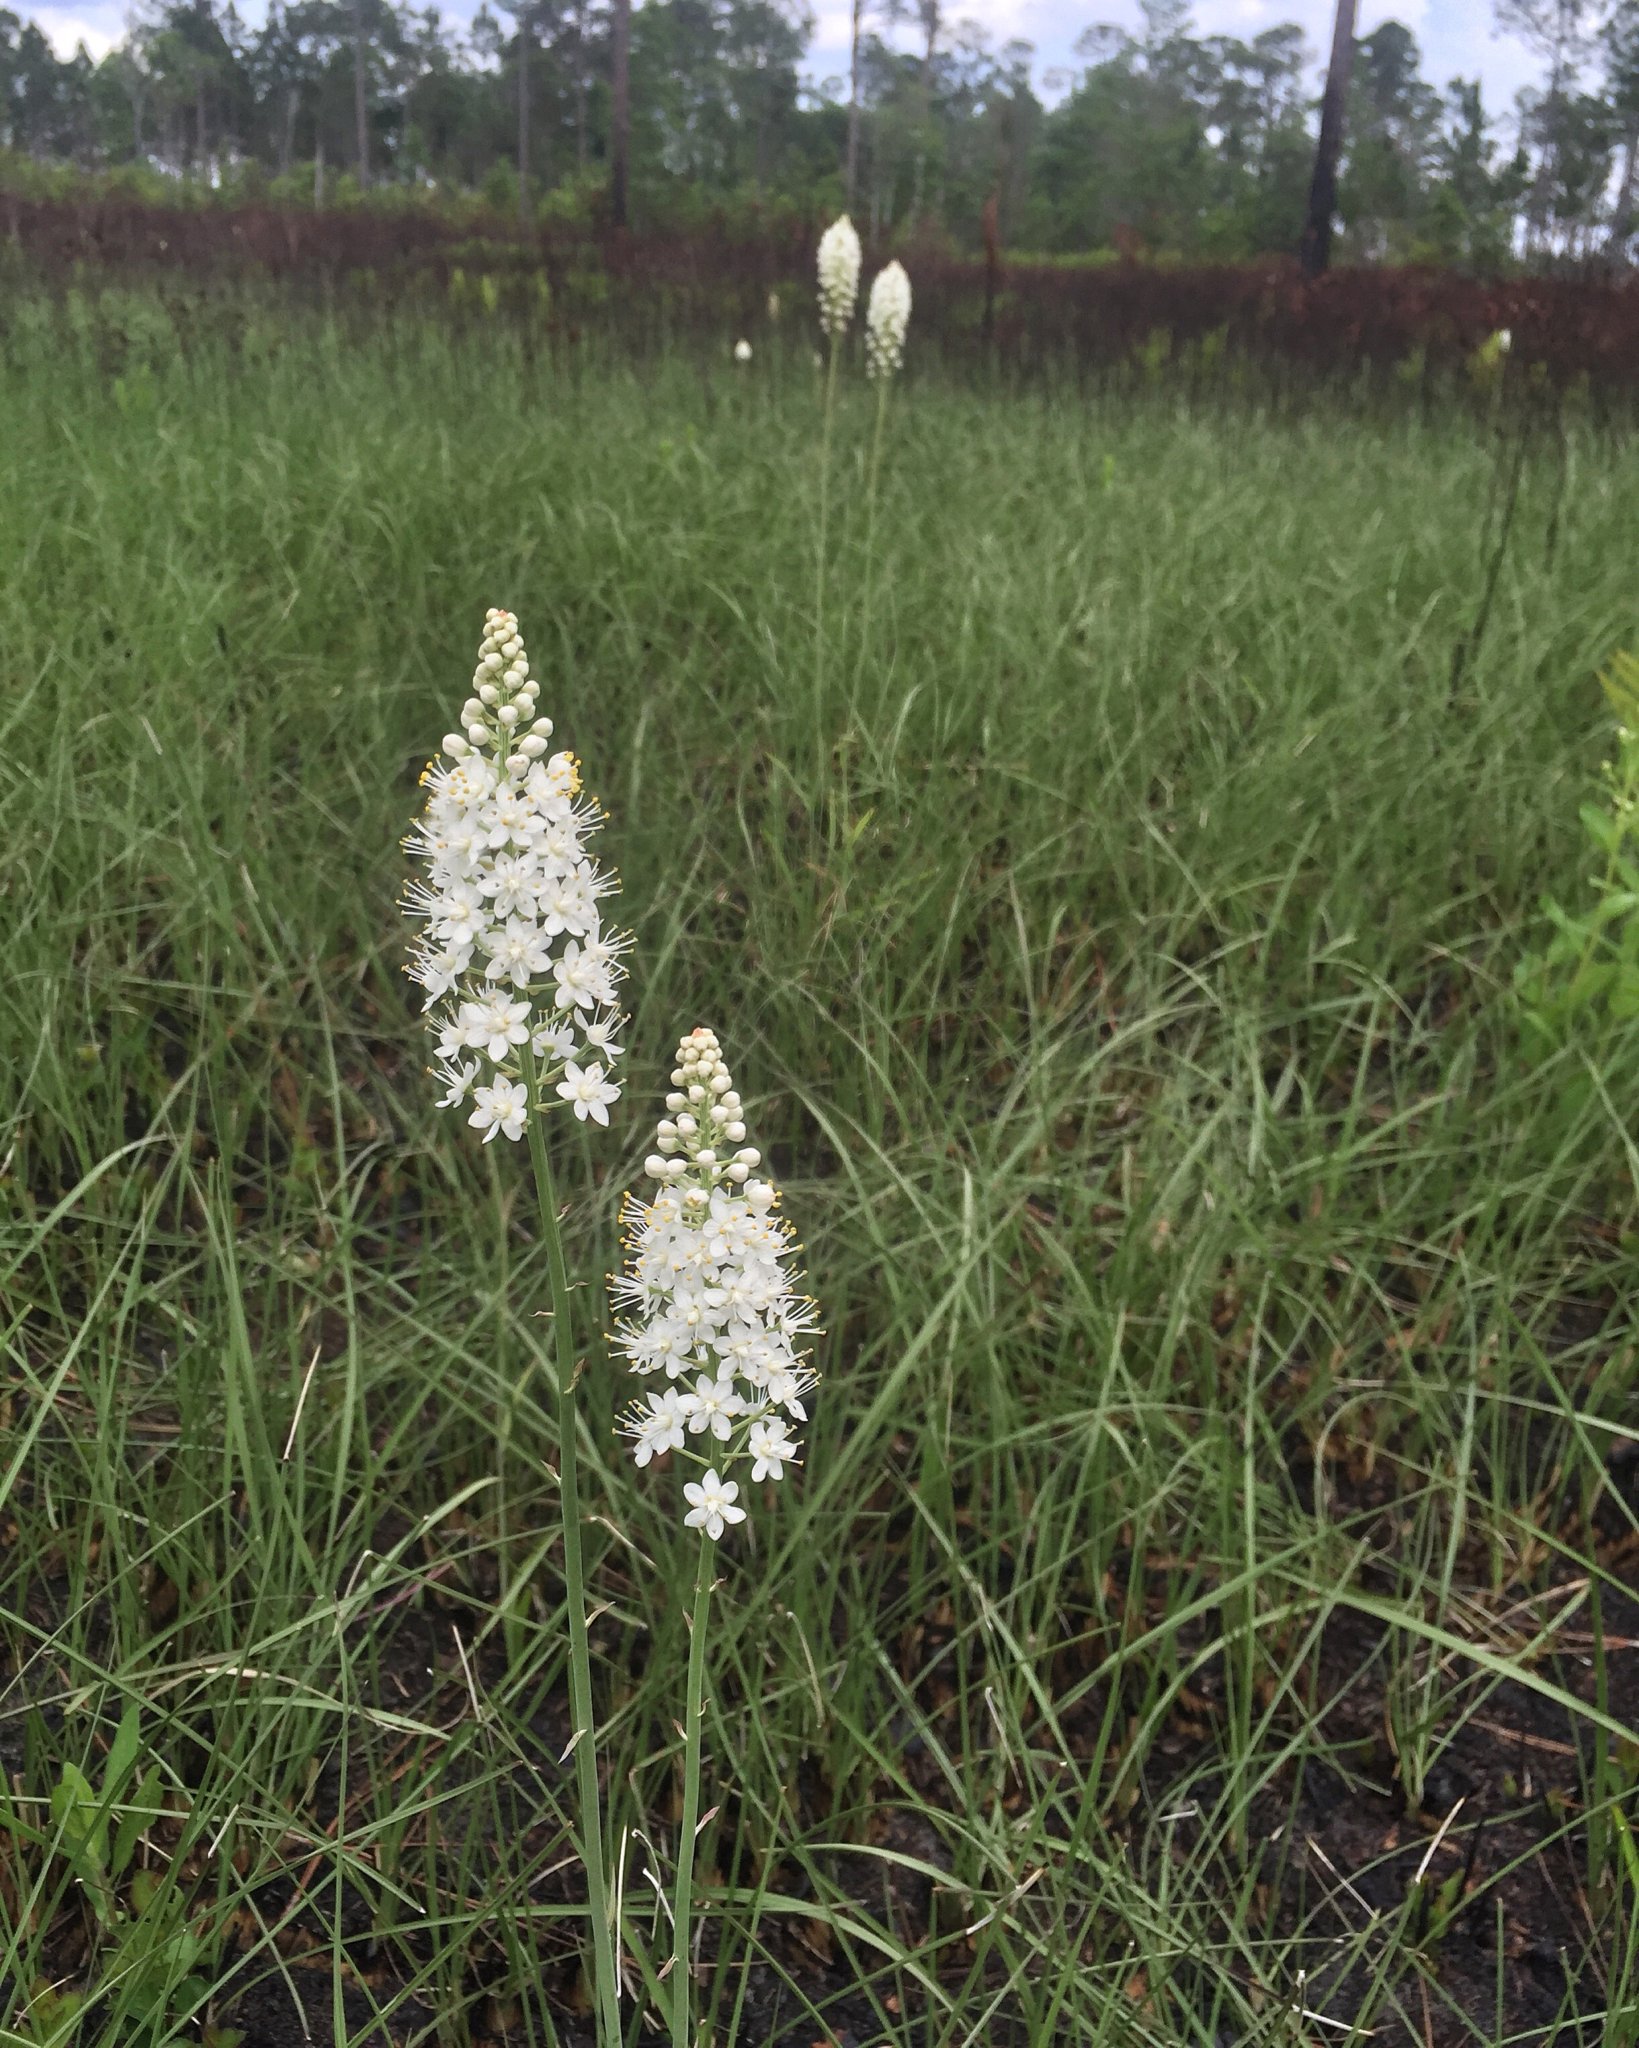 White blooms of the Osceola’s plume can be seen in a field of lush green grasses.